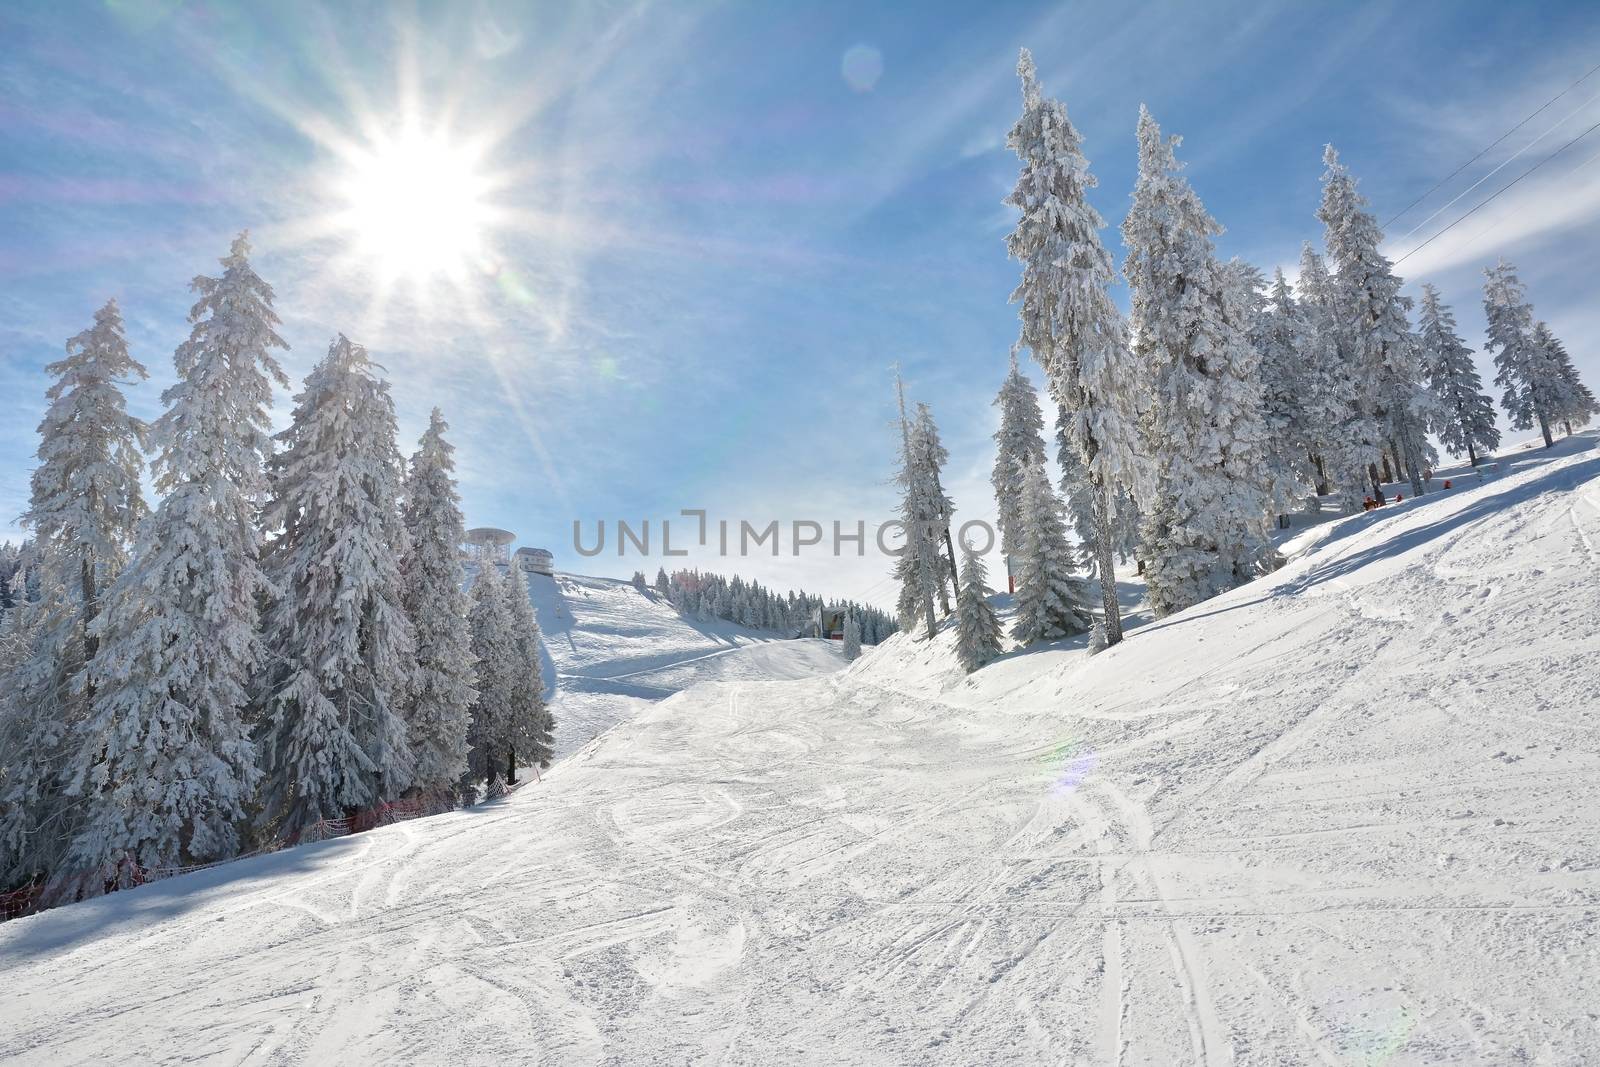 Ski slope and snow covered trees by comet